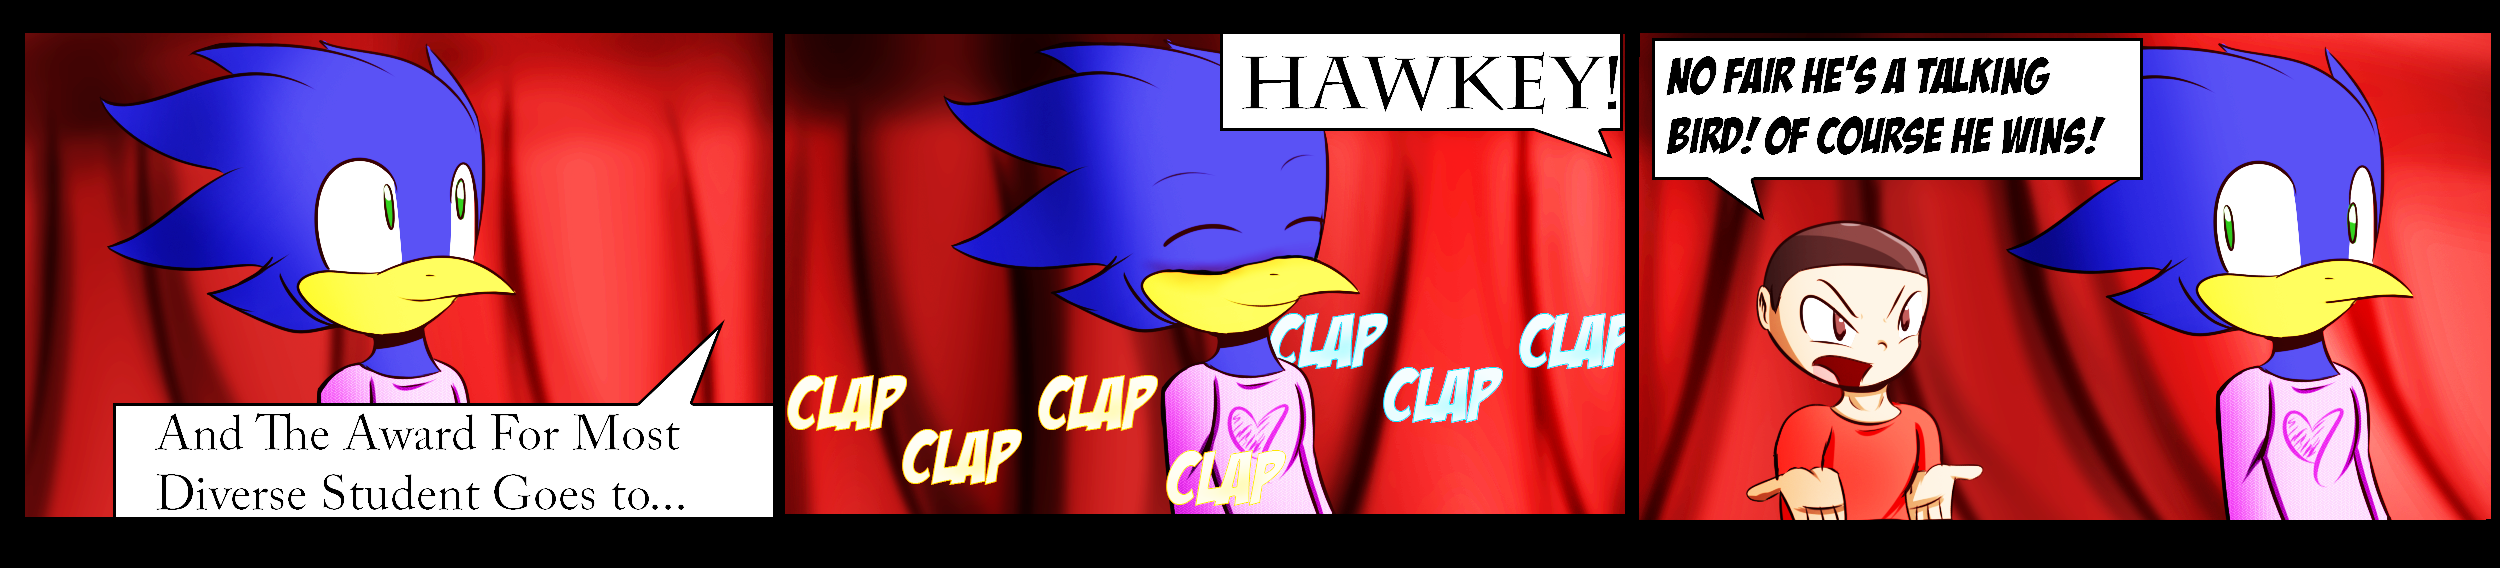 Panel 1: Lil Hawkster is infront of a red curtain, listening to an announcer saying, "And the award for most diverse student goes to..." Panel 2: The announcer says, "Hawkey!" There's clapping and Lil' Hawkster is quite pleased. Panel 3: A person stands behind Lil' Hawkster, hands outstretched, saying, "No fair he's a talking bird! Of course he wins!" Lil' Hawkster peeks over his shoulder.